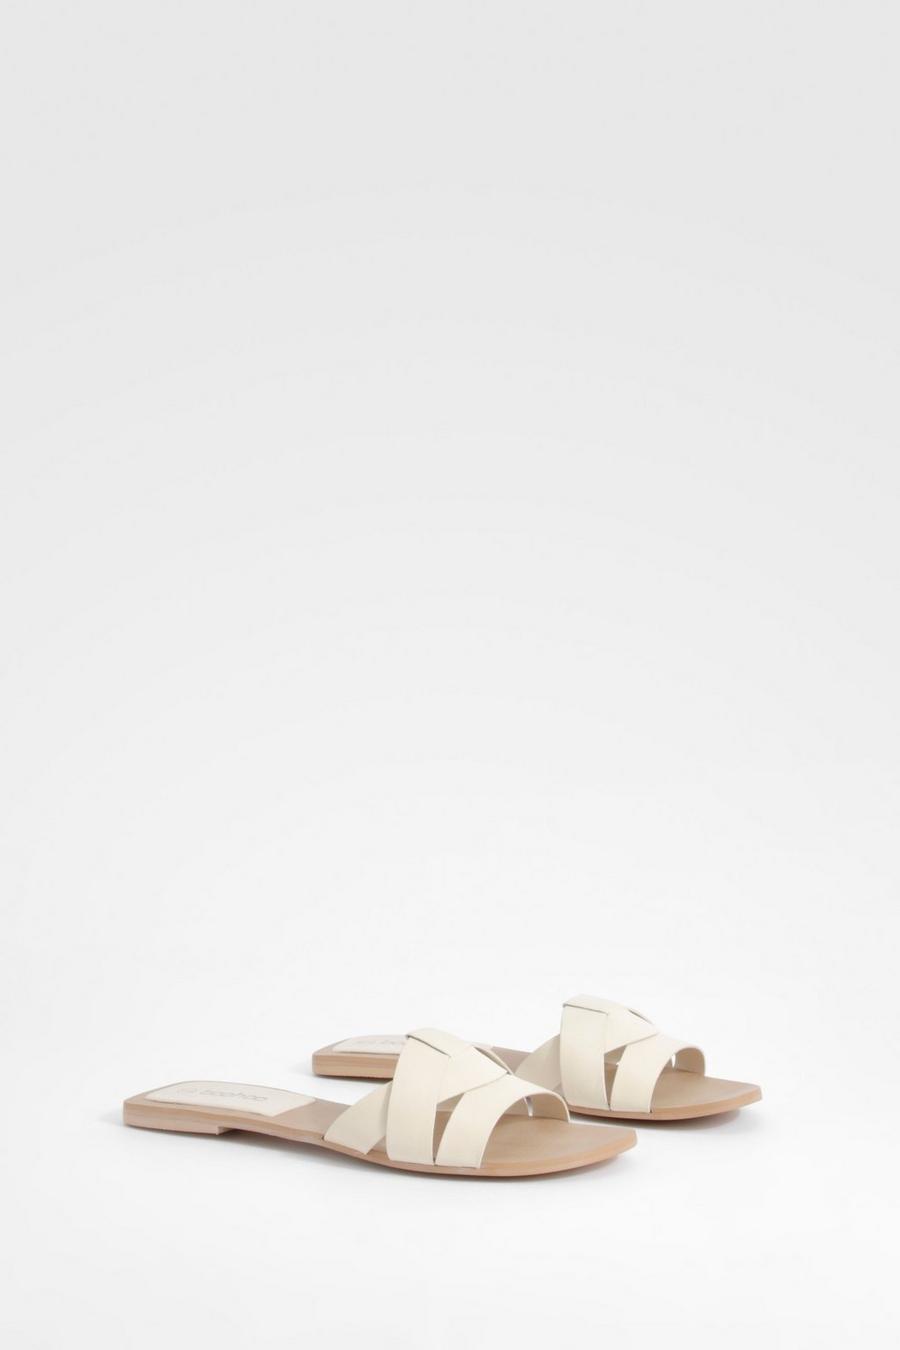 Cream Woven Leather Mule Sandals 